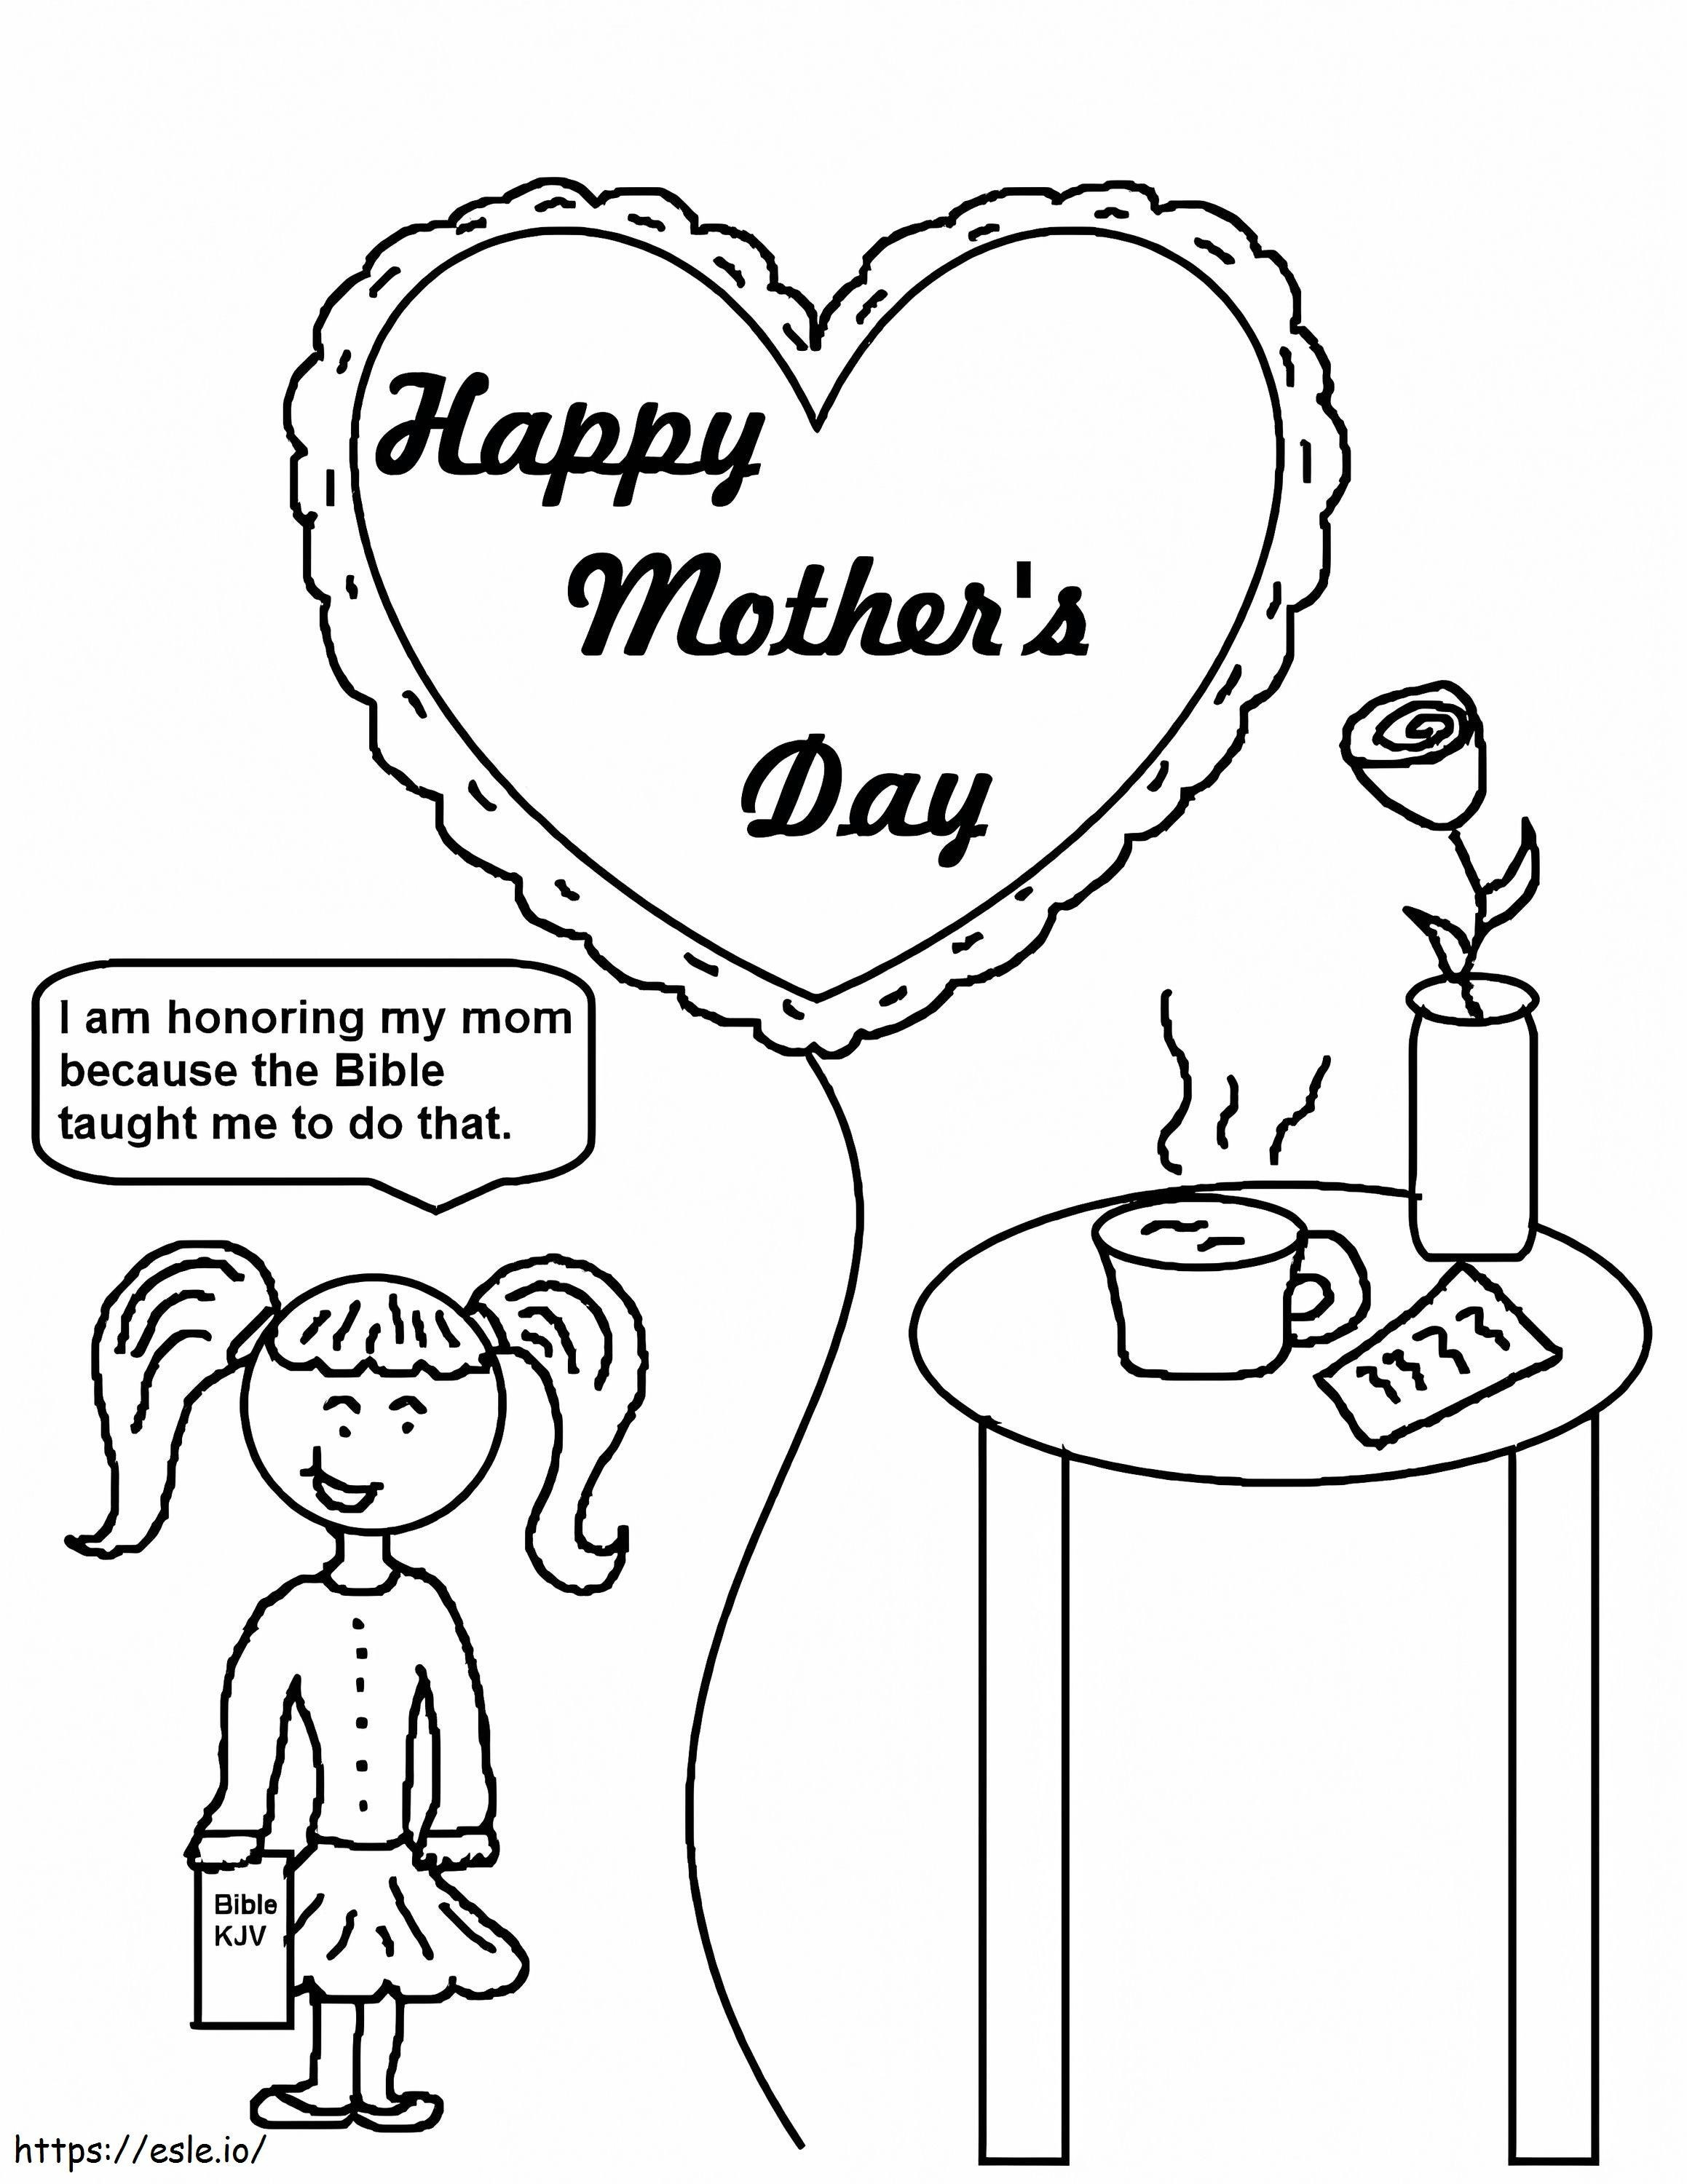 Happy Mothers Day 3 coloring page